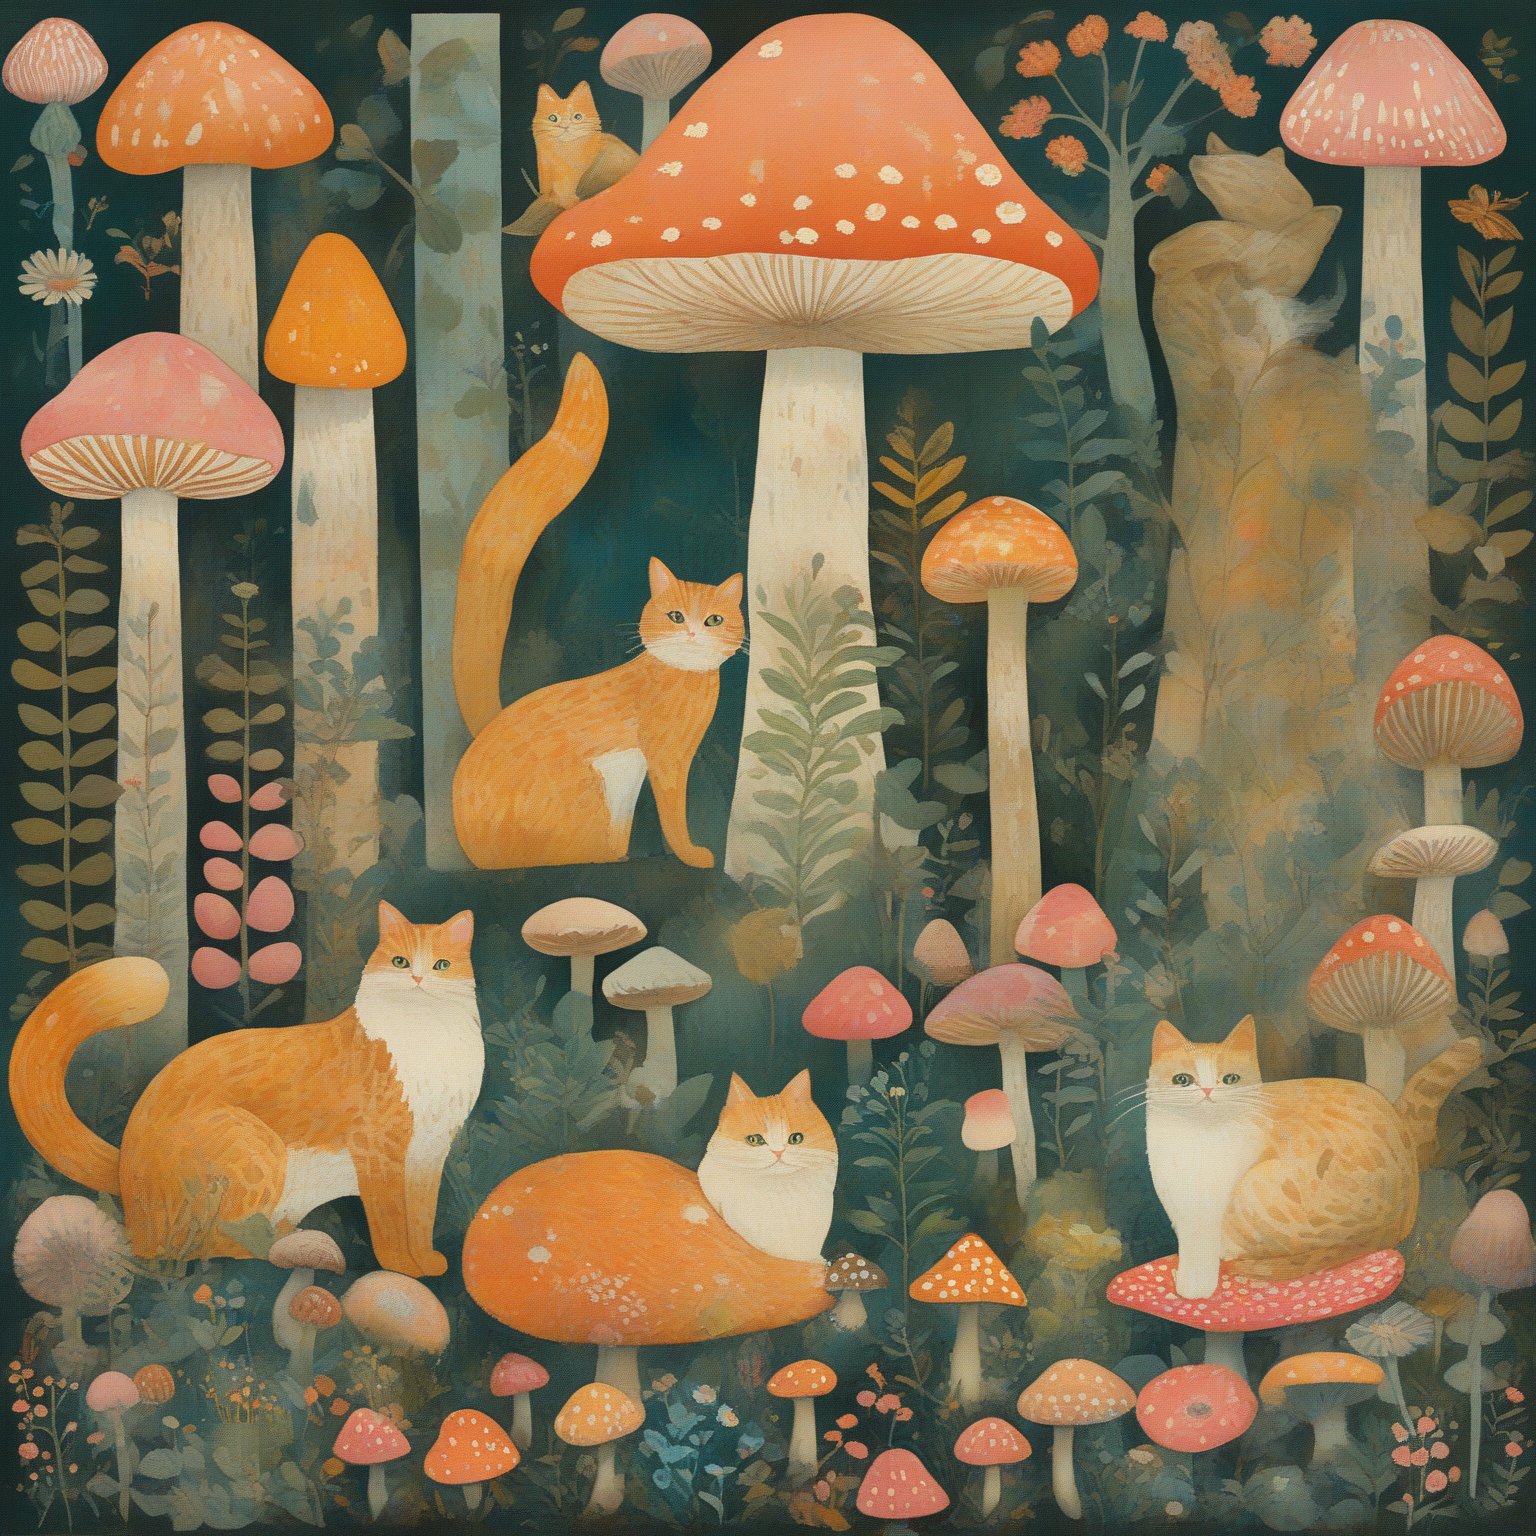 A whimsical forest scene with four cats of varying colors and designs. They are surrounded by a myriad of objects, including mushrooms, flowers, trees, and other flora. The cats are positioned in different areas, with one sitting on a mushroom, another standing amidst the flowers, and the other two resting on the forest floor. The color palette is vibrant, with shades of orange, pink, white, and green dominating the scene. The overall ambiance is playful and magical.